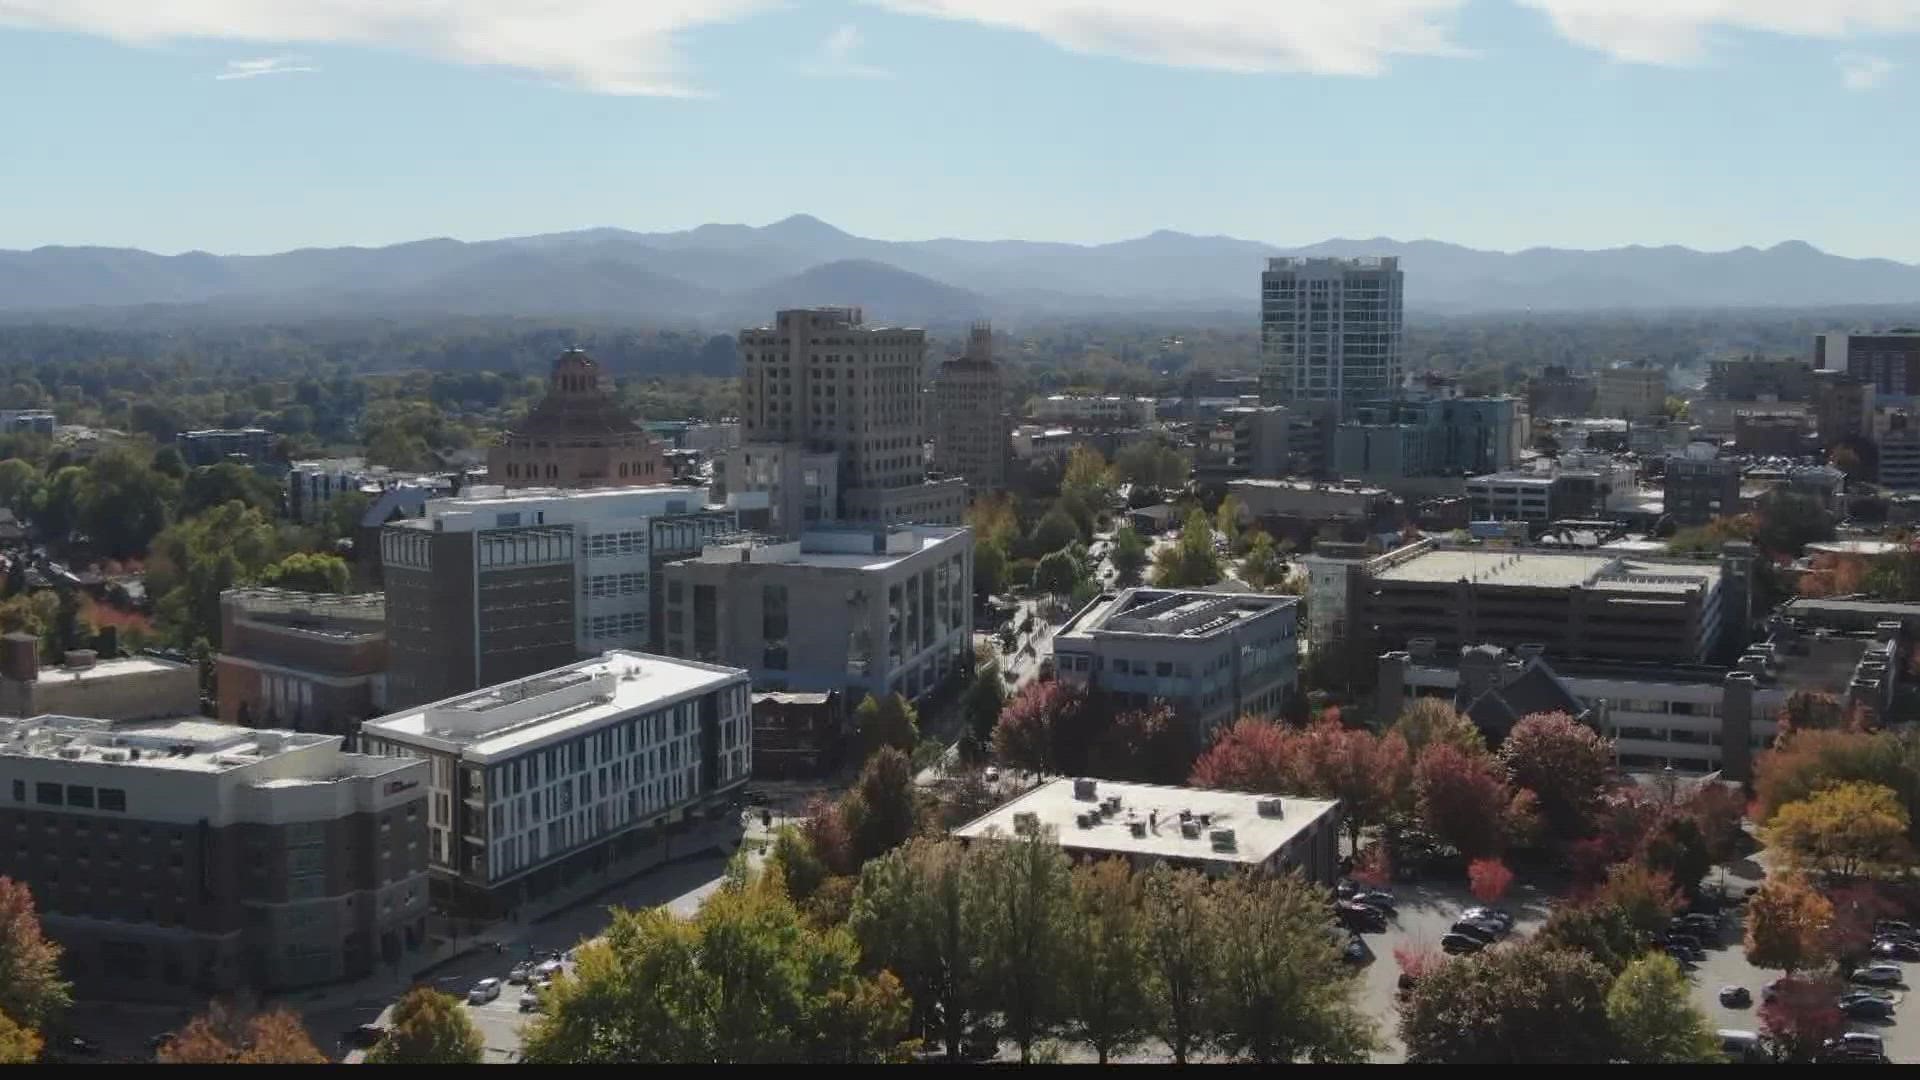 Chuck's Big Adventure in Asheville, North Carolina, will air on Sunrise the week of Nov. 15.